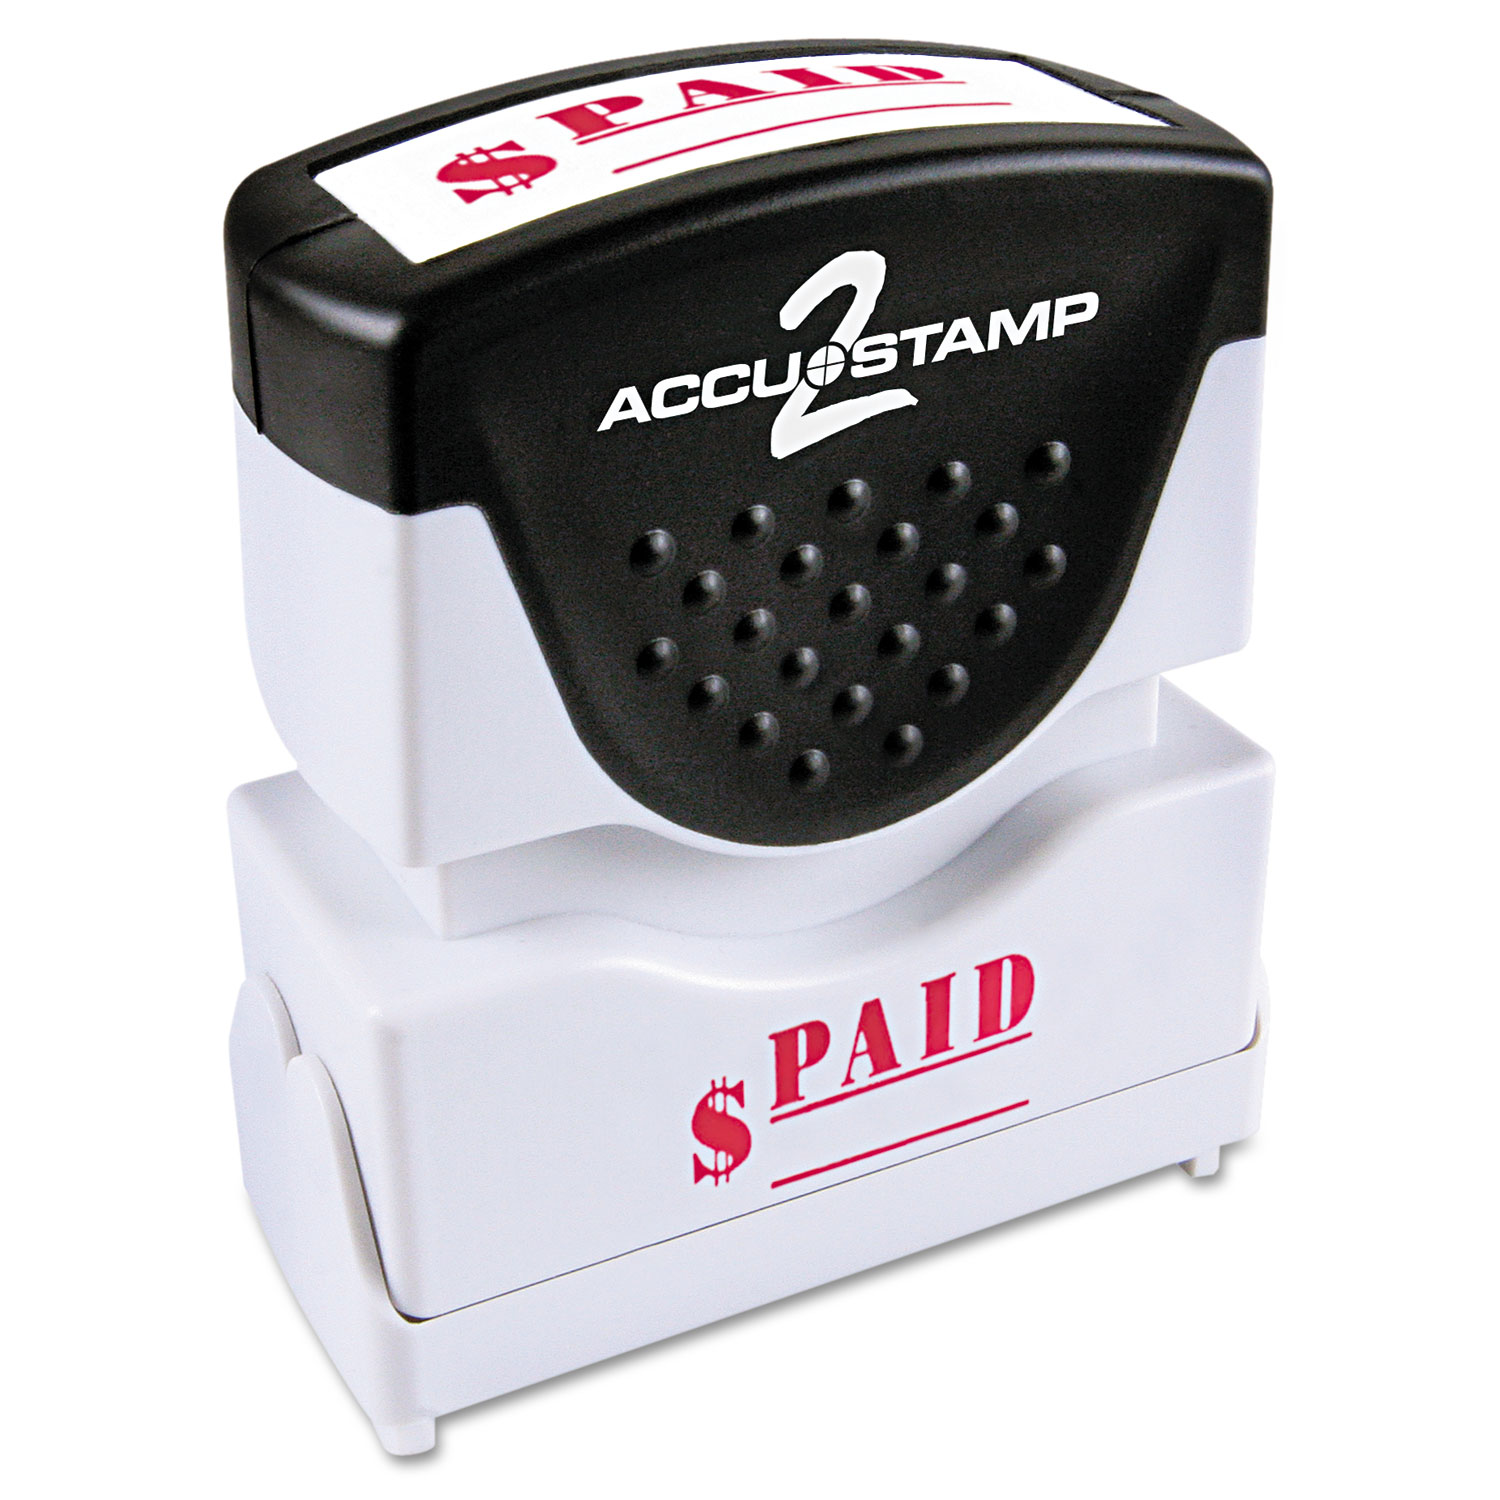  ACCUSTAMP2 035578 Pre-Inked Shutter Stamp, Red, PAID, 1 5/8 x 1/2 (COS035578) 